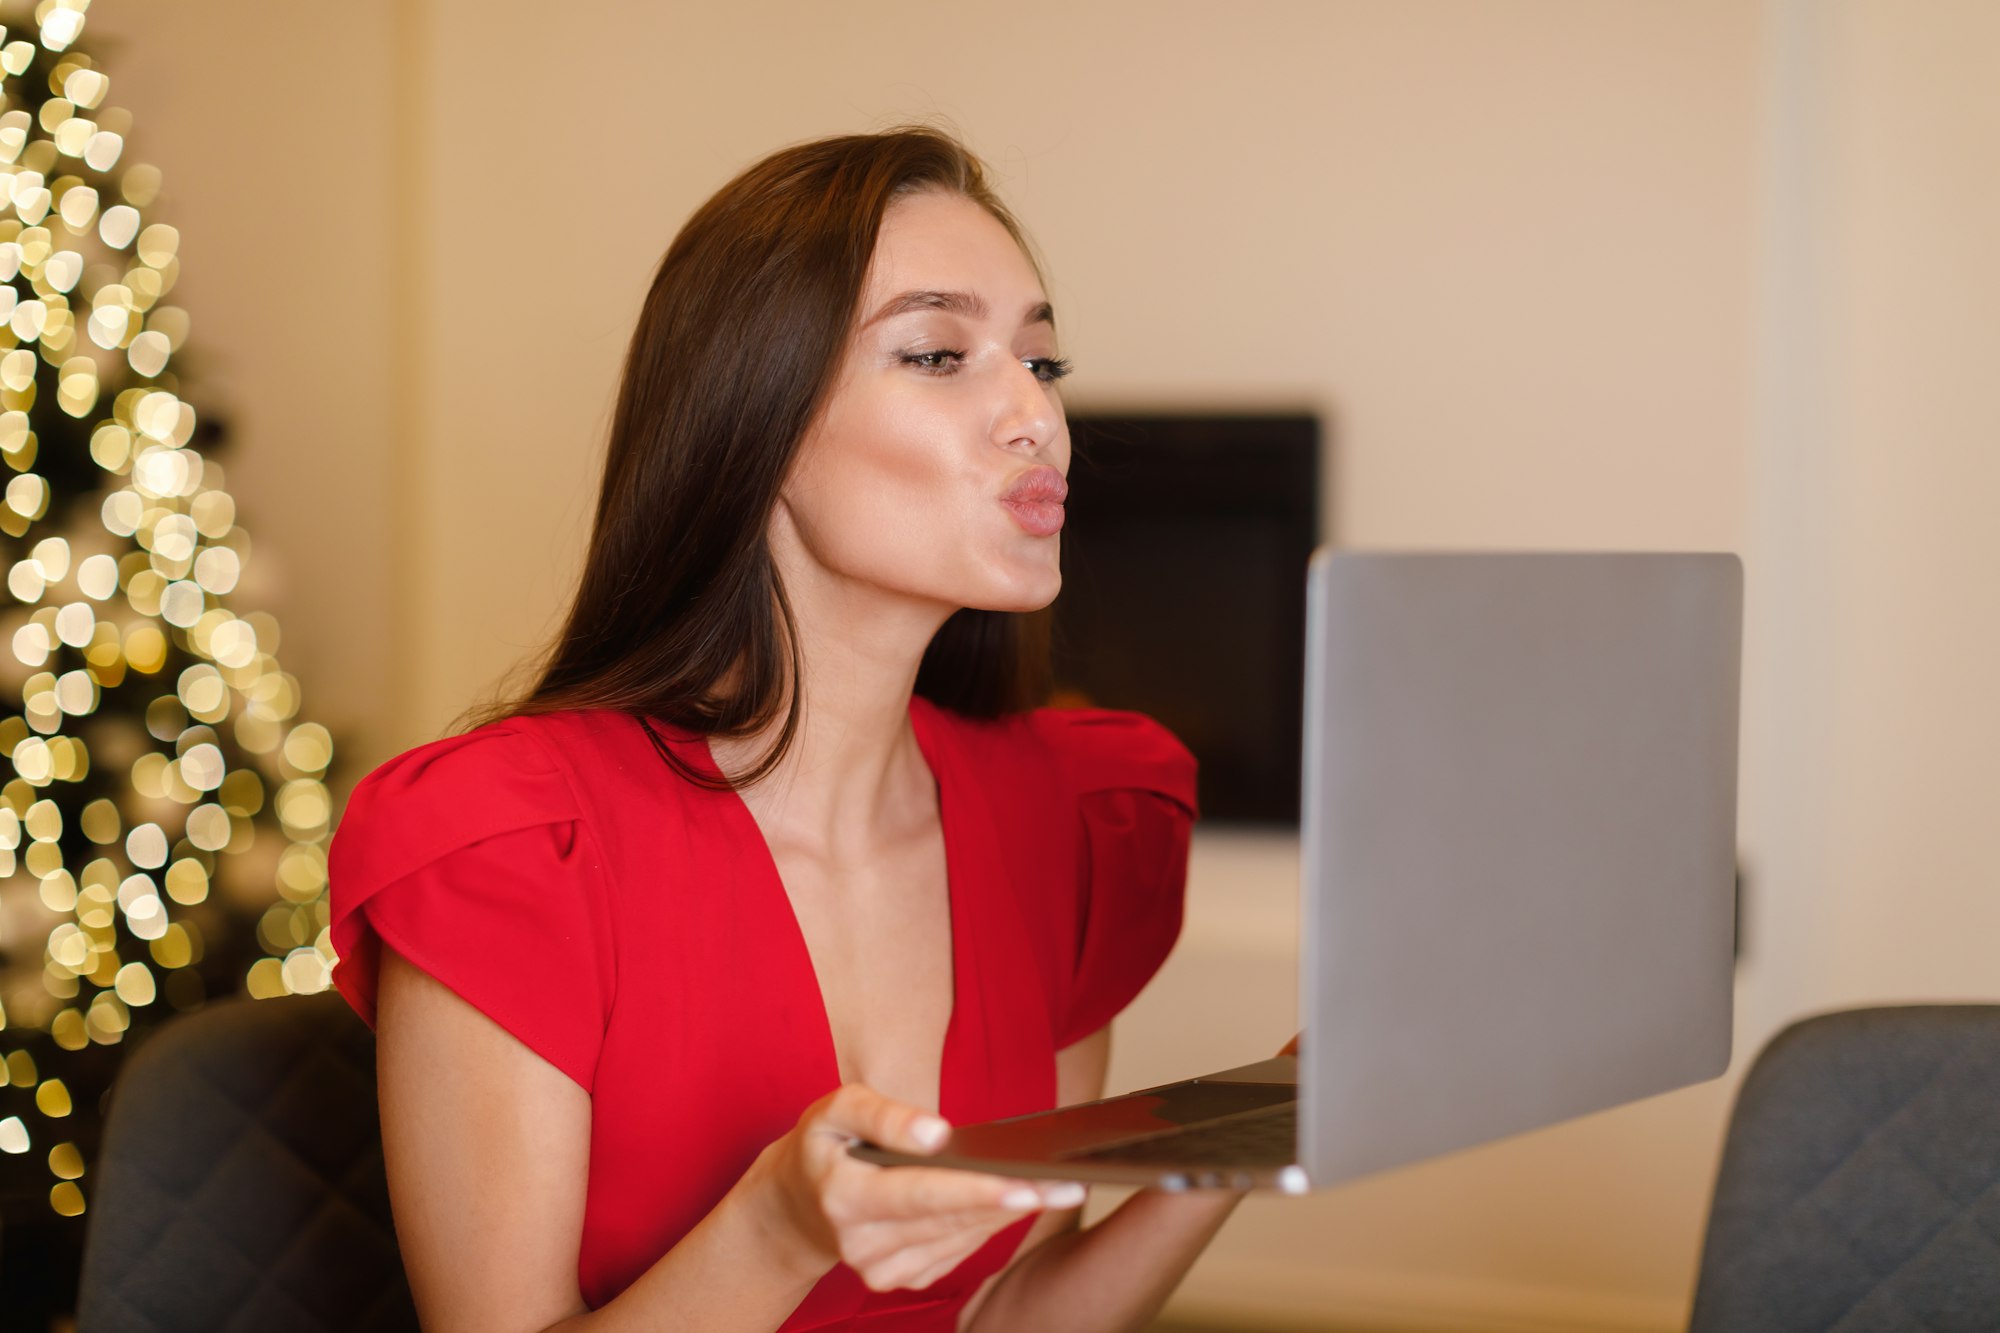 Woman blowing kiss during virtual date on laptop